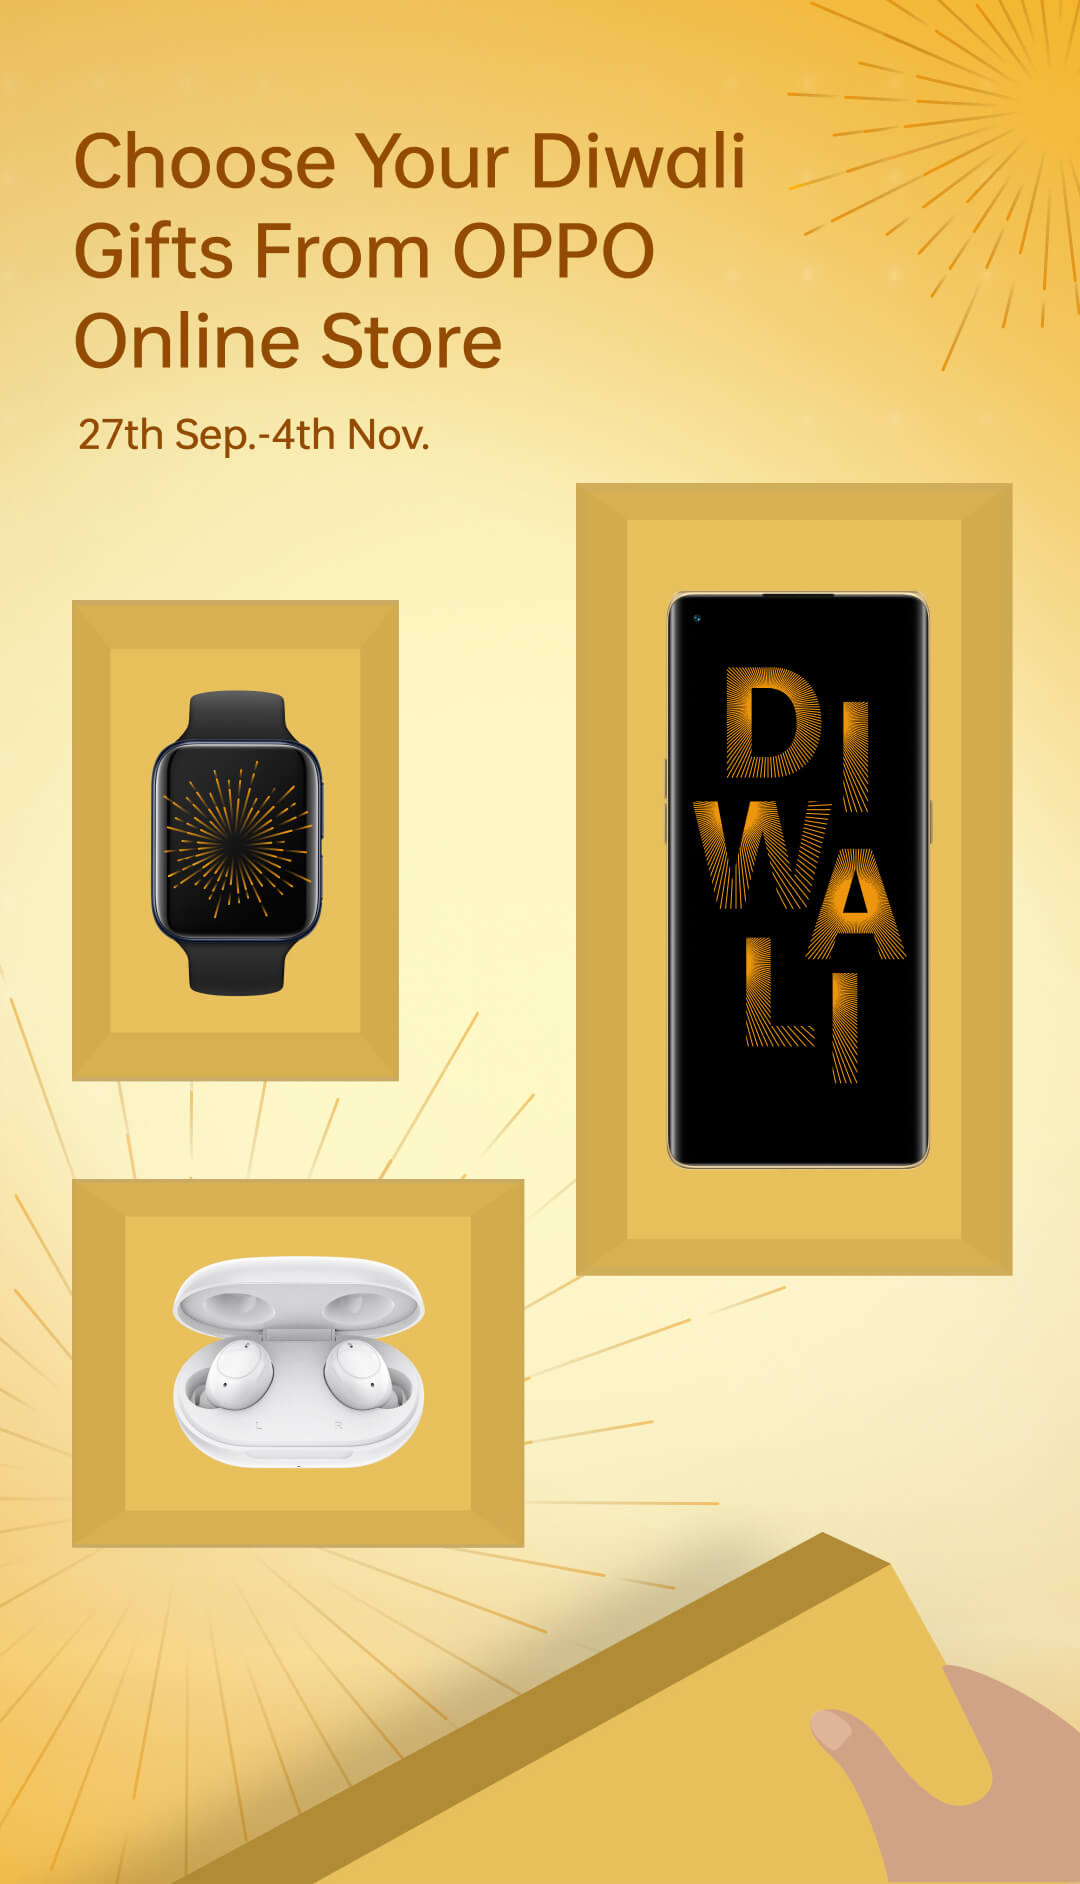 The Best Diwali Gift Ideas for Employees and Customers